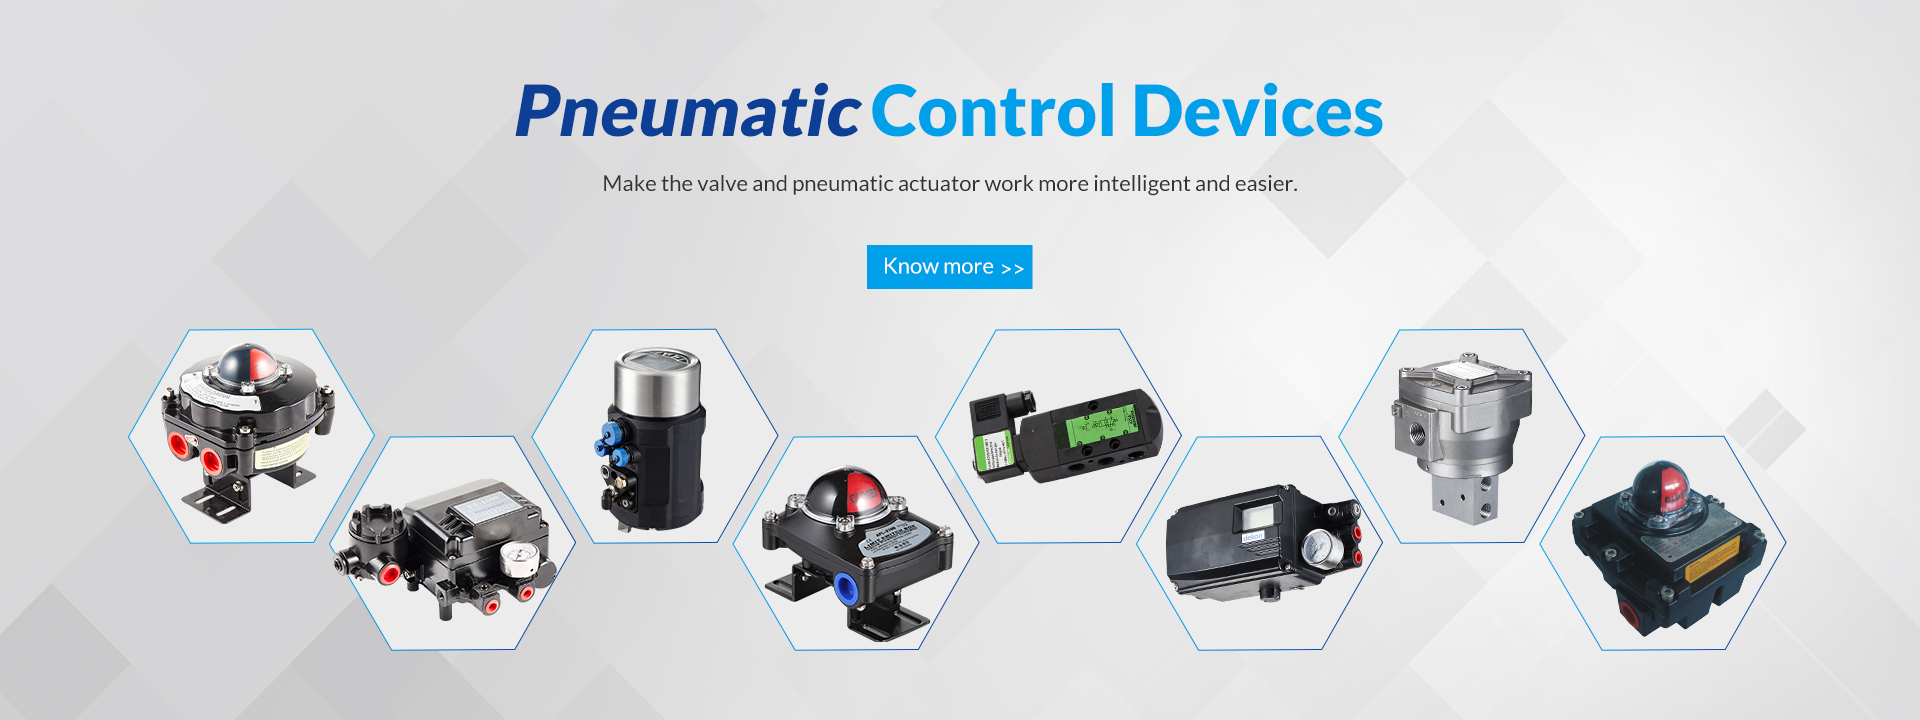 PNEUMATIC DEVICES